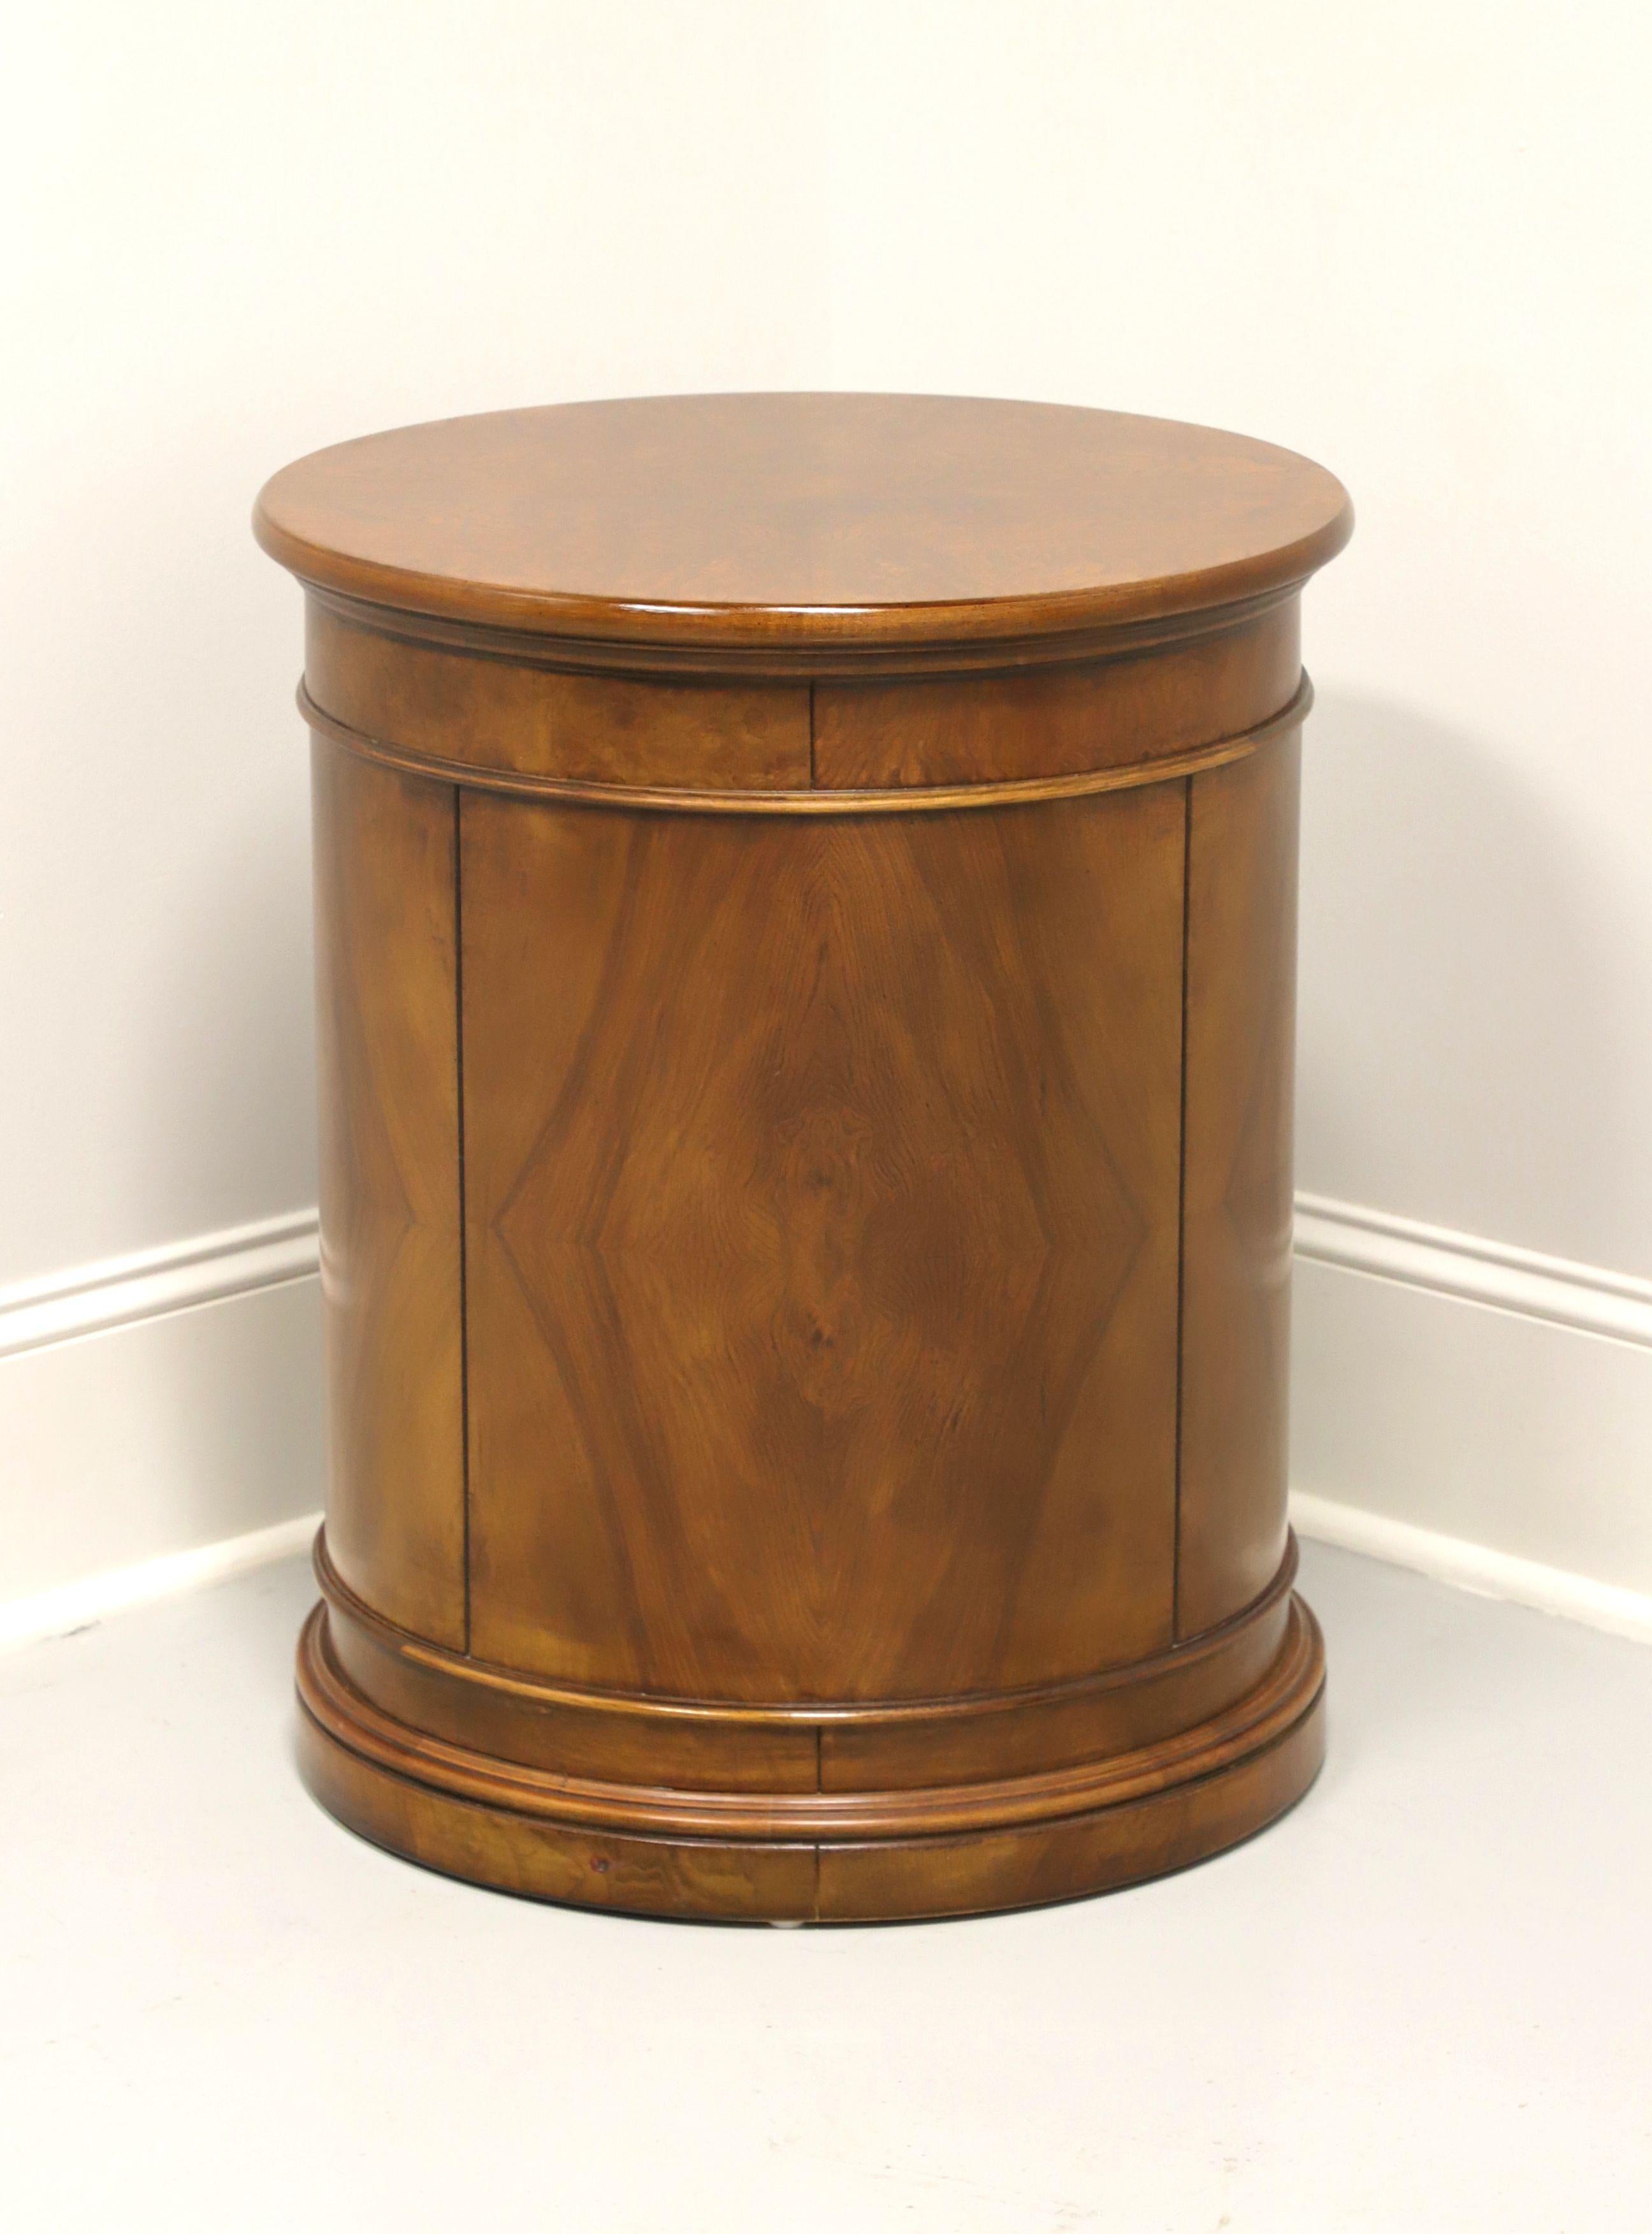 American Mid-20th Century Burl Elm Round Cabinet Accent Table